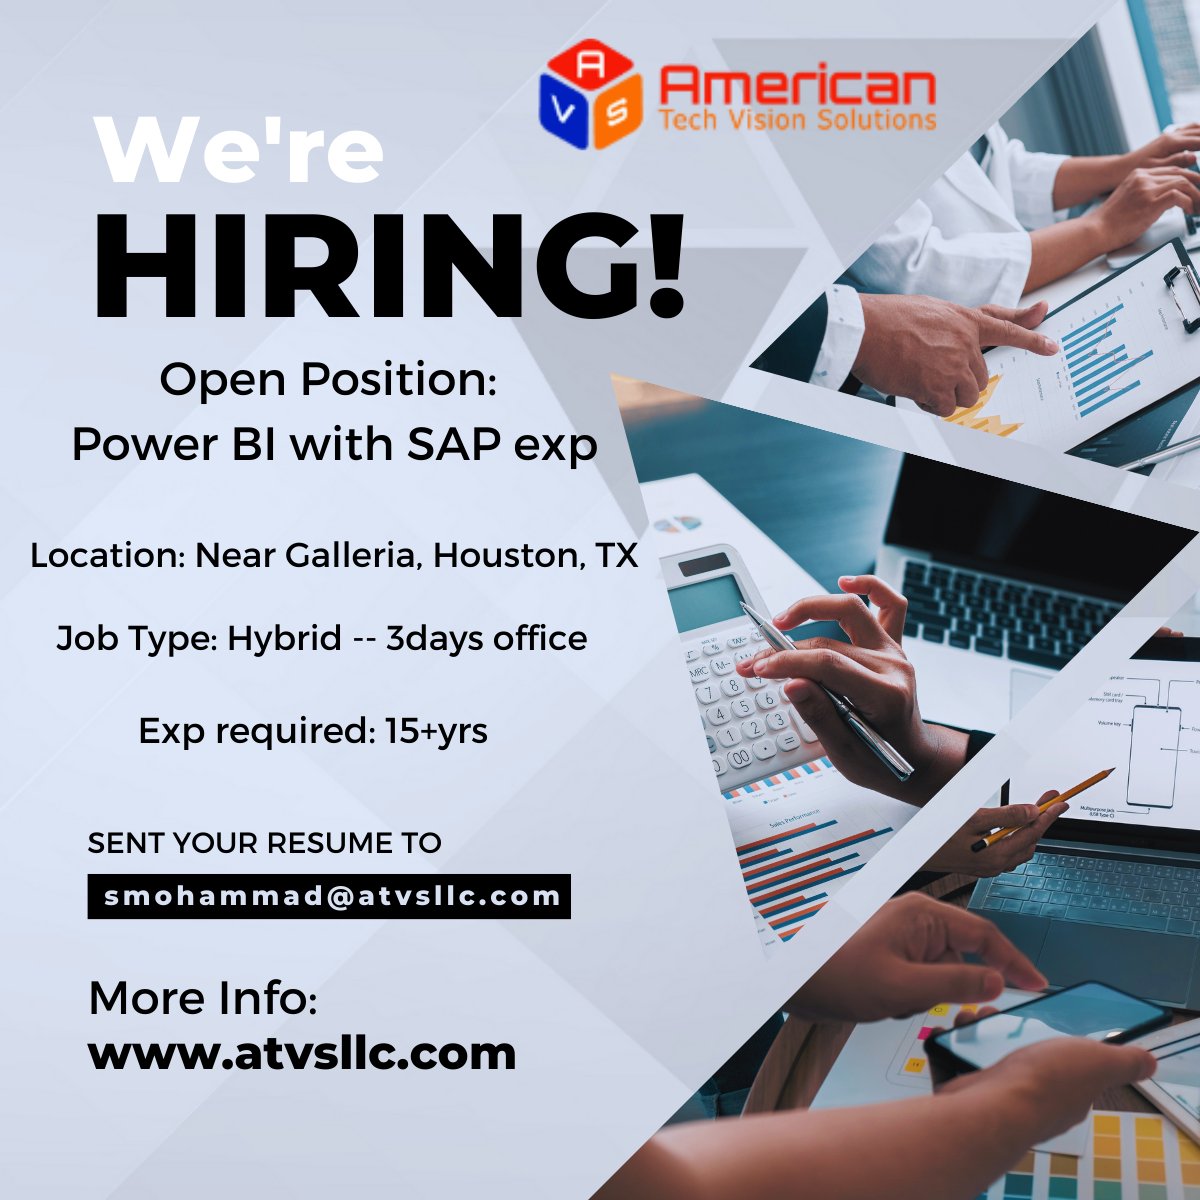 We have openings for the post of #PowerBI with #SAP exp.
Interested candidates can send resume to smohammad@atvsllc.com
American Tech Vision Solutions-atvsllc.com
#softwareengineer #consultants #consultant #consultancy #consultantjobs #bigdatadeveloper #bigdata